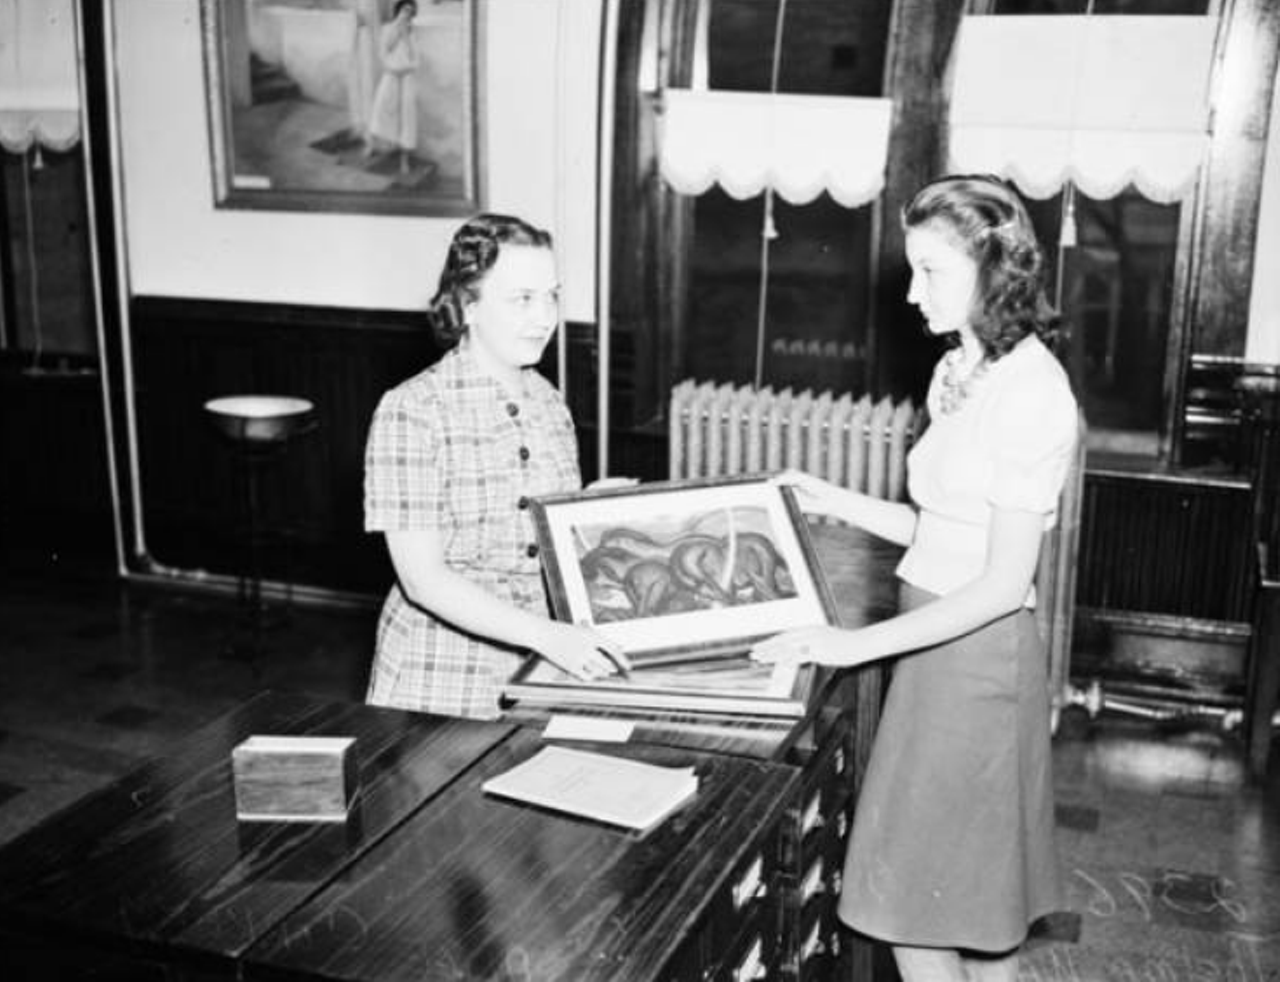 Our Lady of the Lake librarian Alice Corkery was super excited to show off pictures in the campus' then-new art library back in 1940.